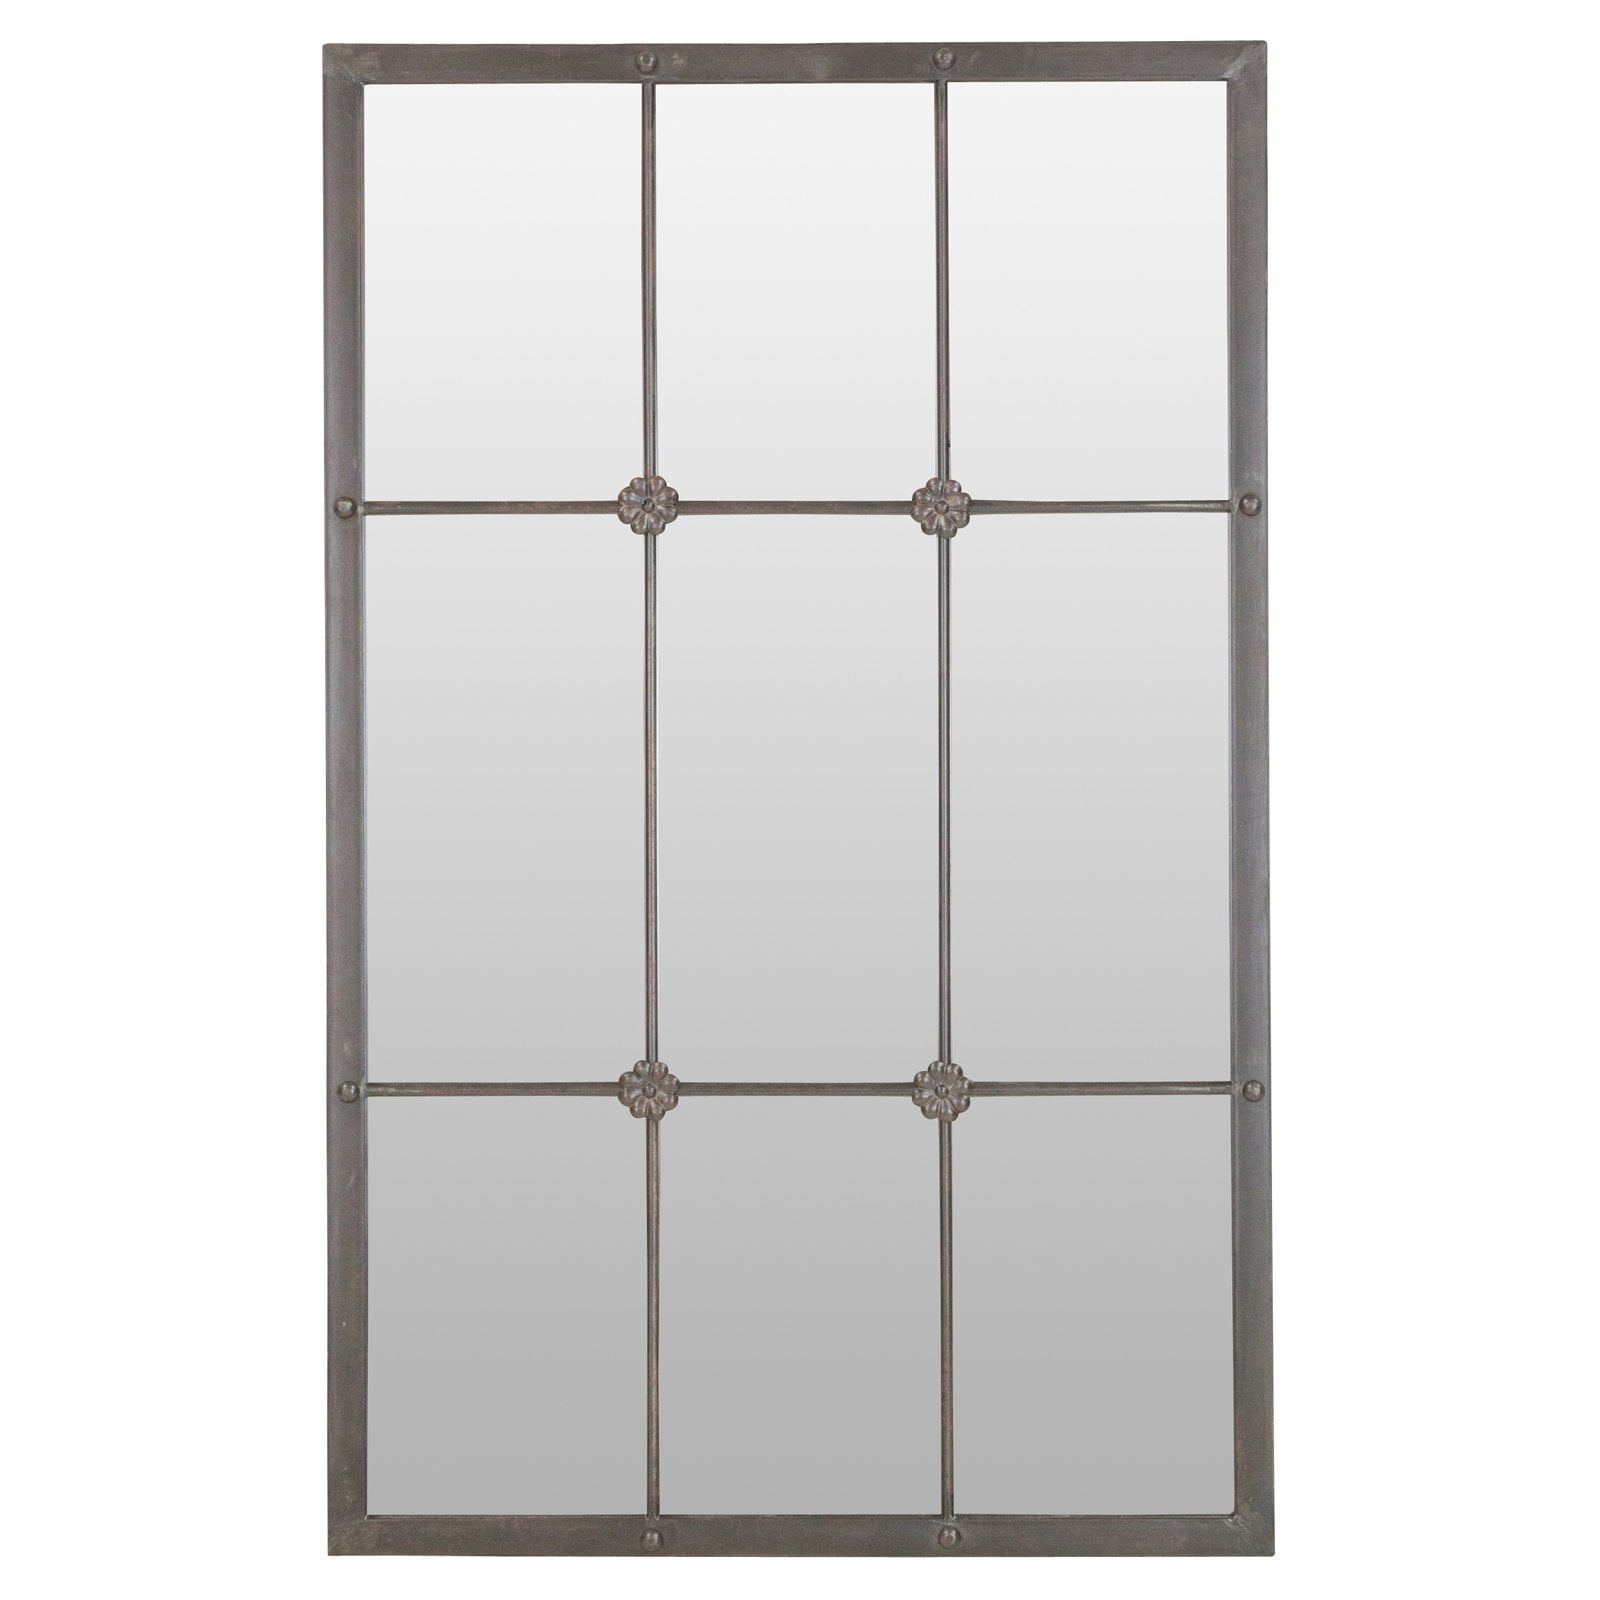 Picture of Aspire Home Accents 6350 Kinslee Window Pane Wall Mirror